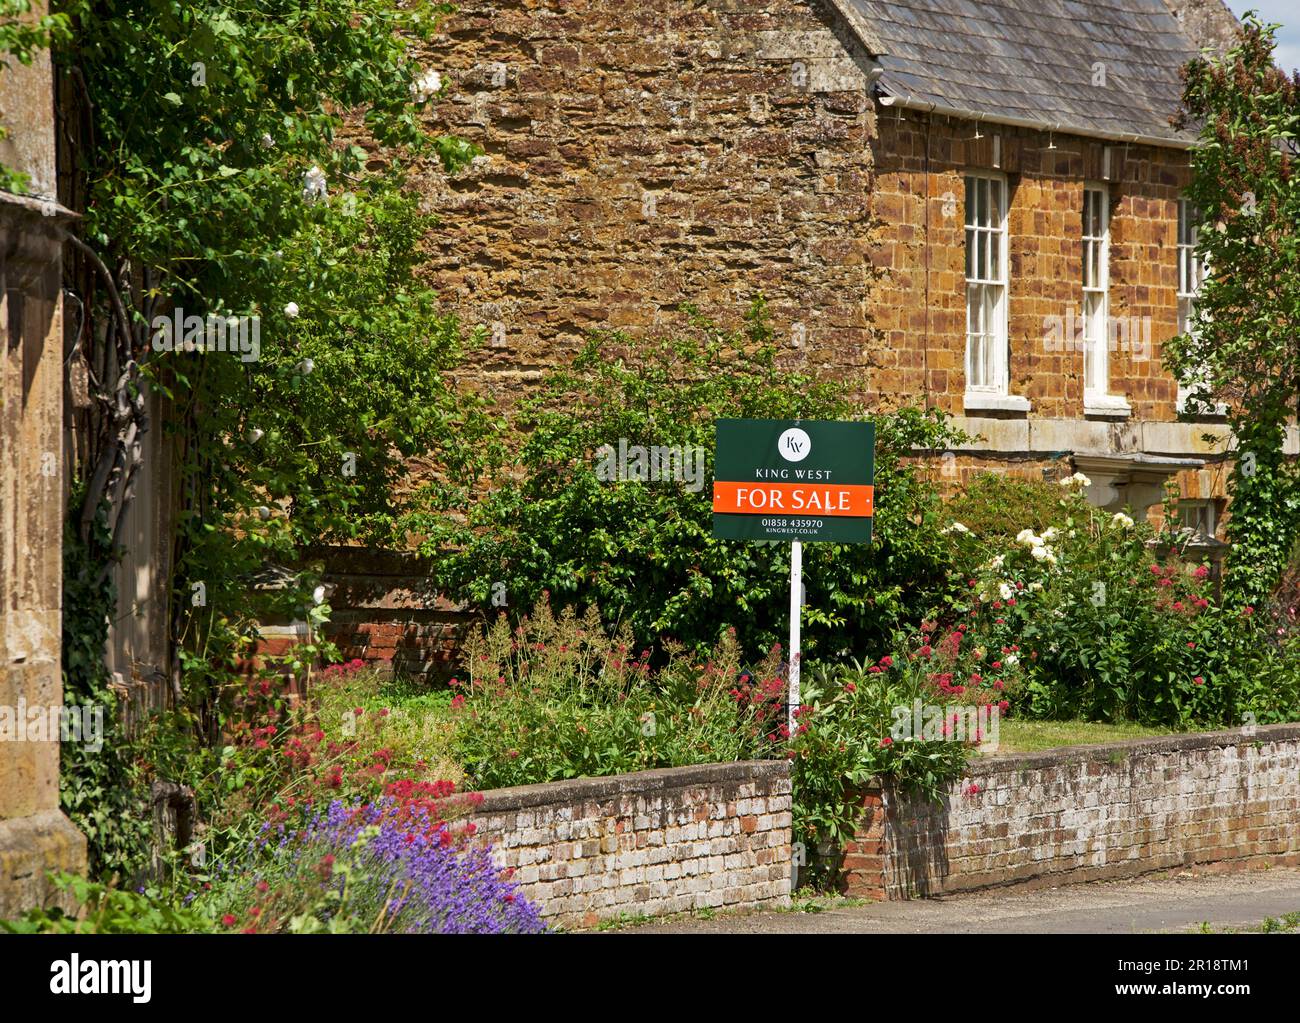 House for sale sign in the village of Weston by Welland, Northampton, England UK Stock Photo